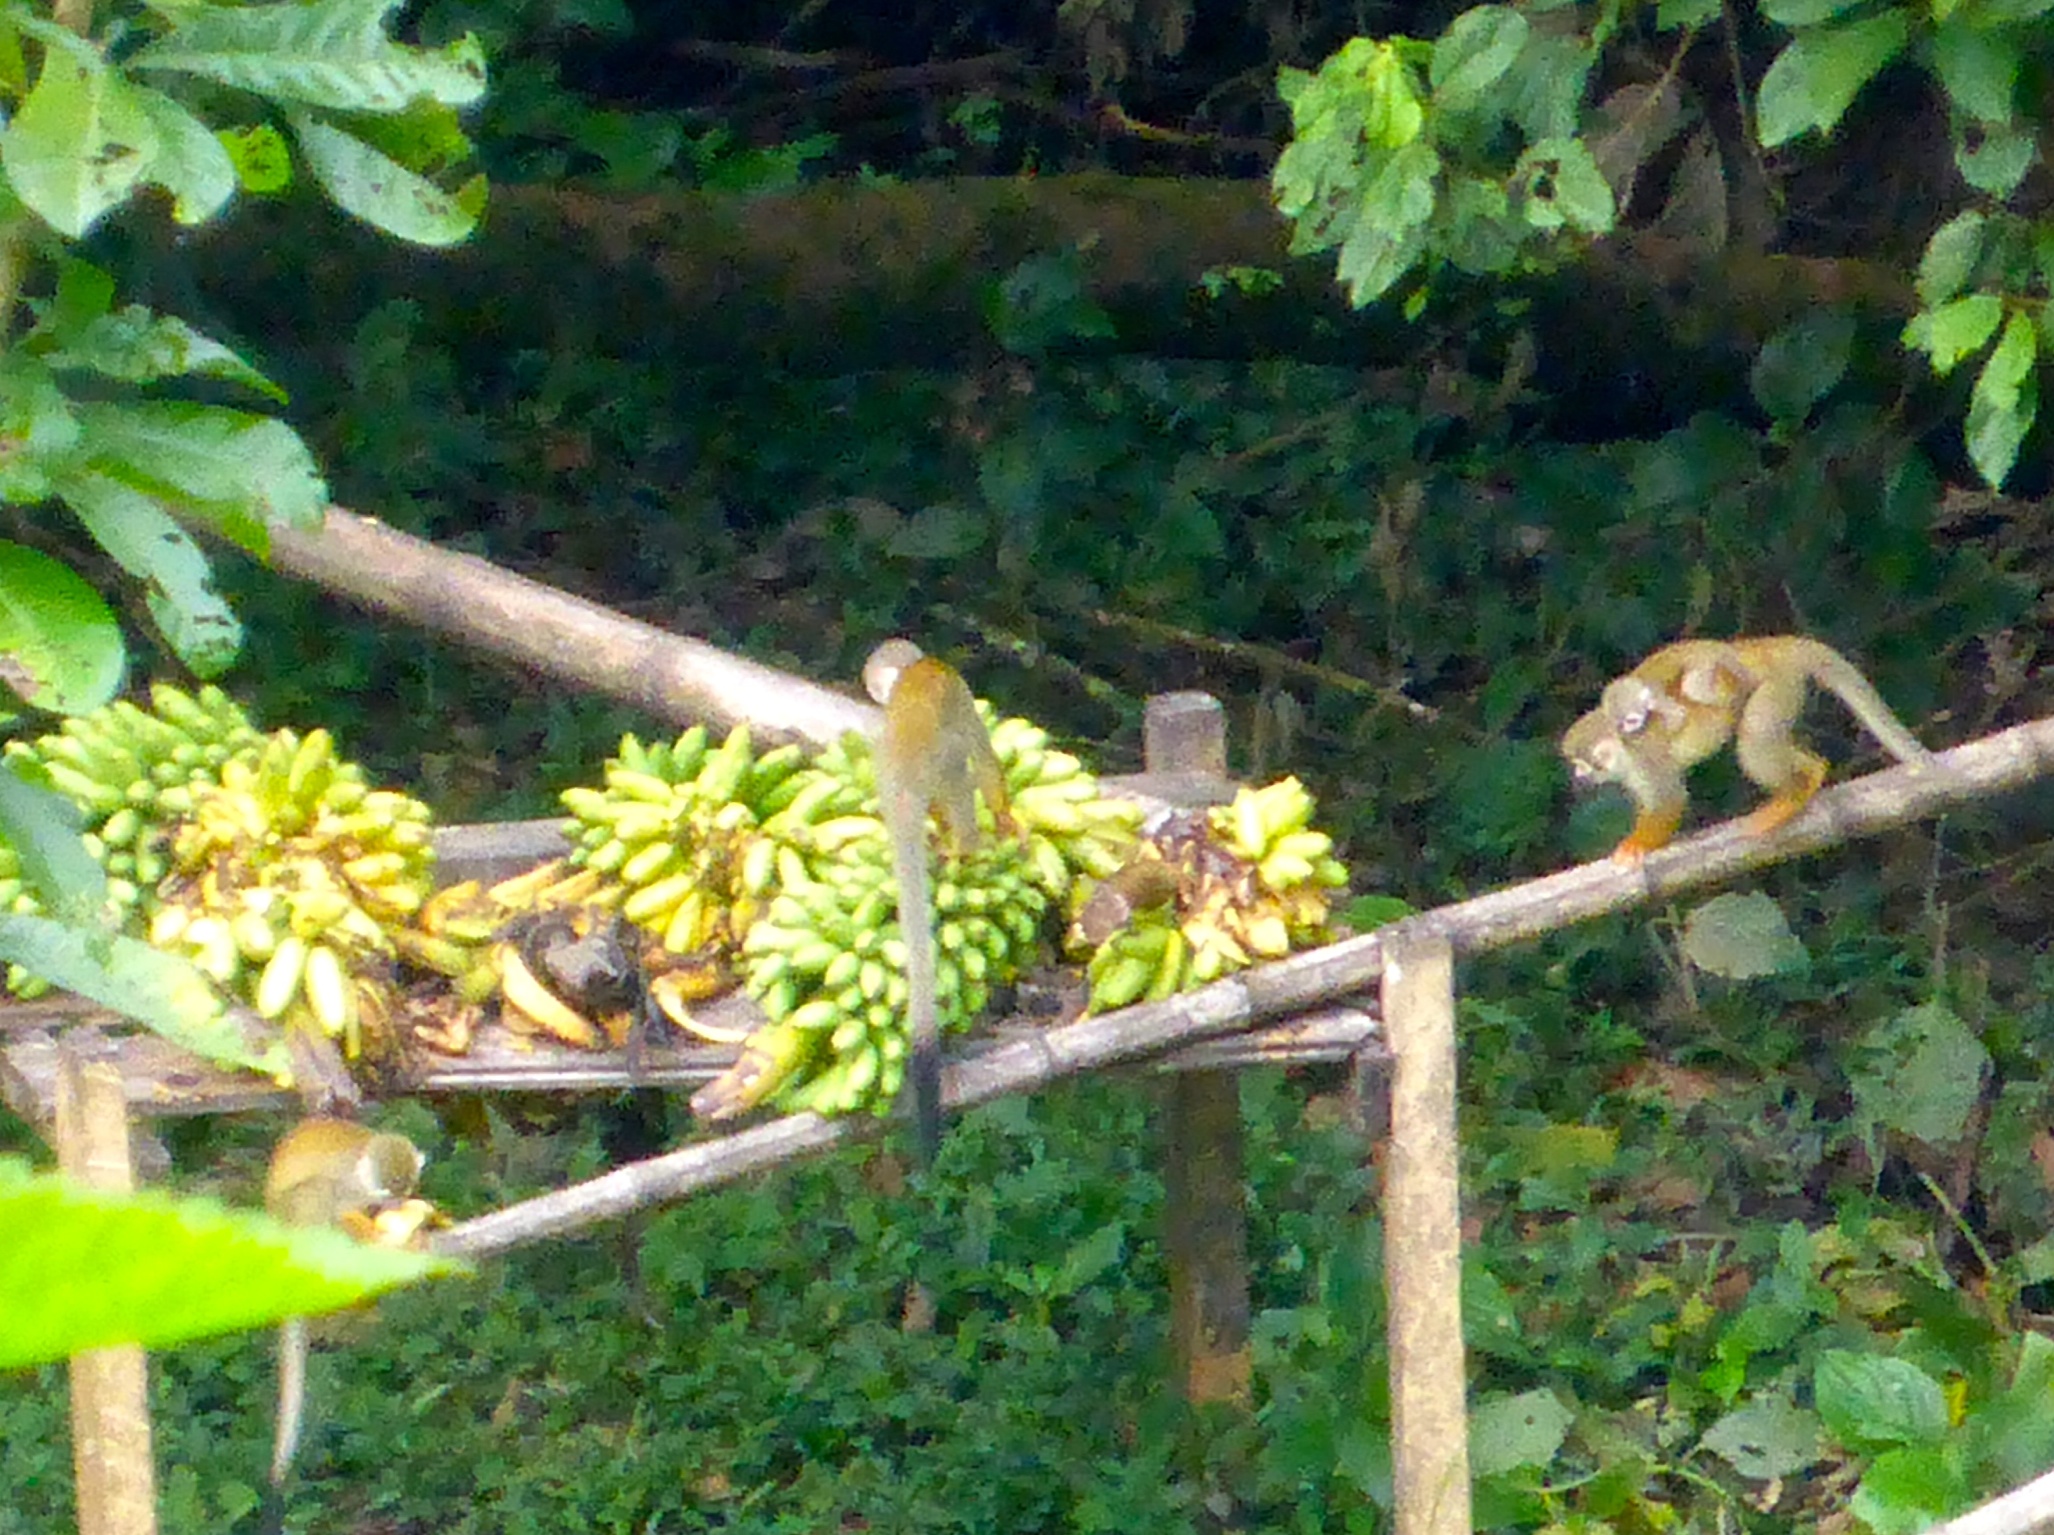 Spider monkeys came down from the trees to eat the bananas left for them.  